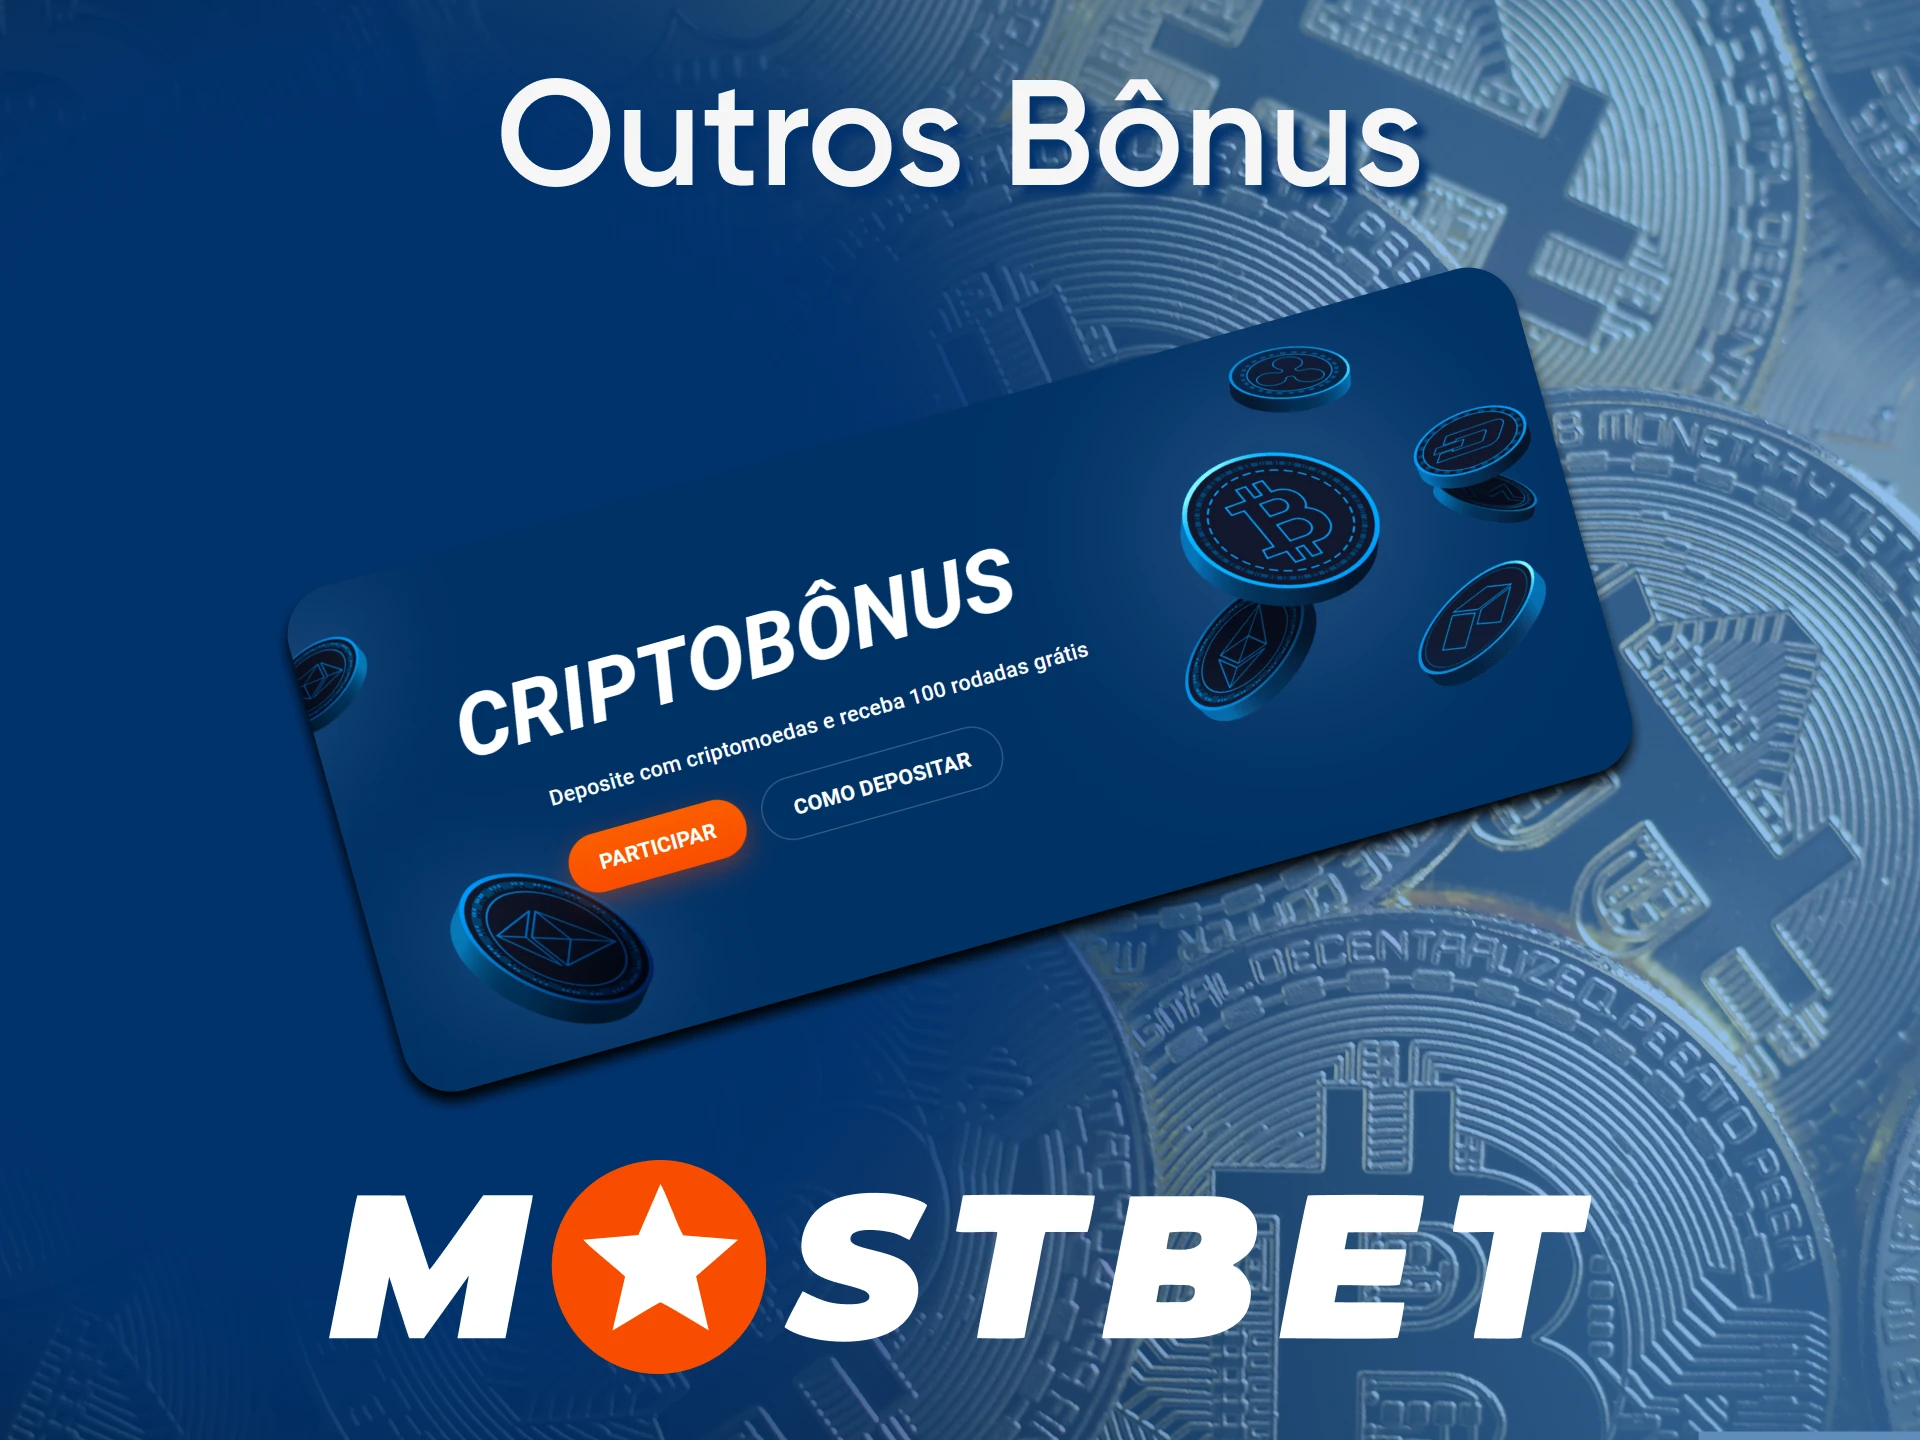 There are many bonuses currently available at Mostbet.